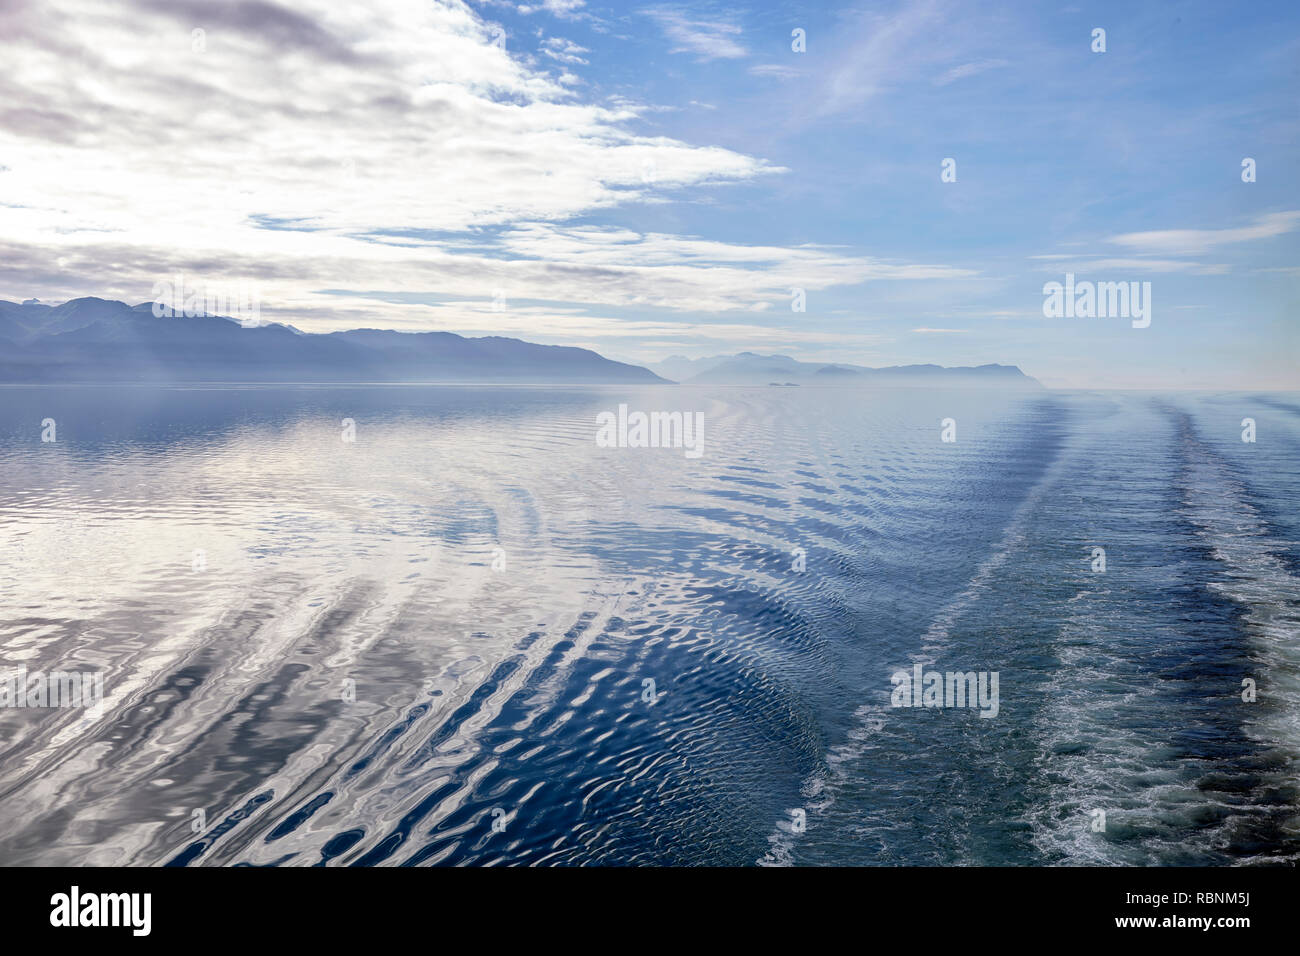 Wake Of Boat On Lake In Alaska Surrounded By Mountains And Forests Stock Photo